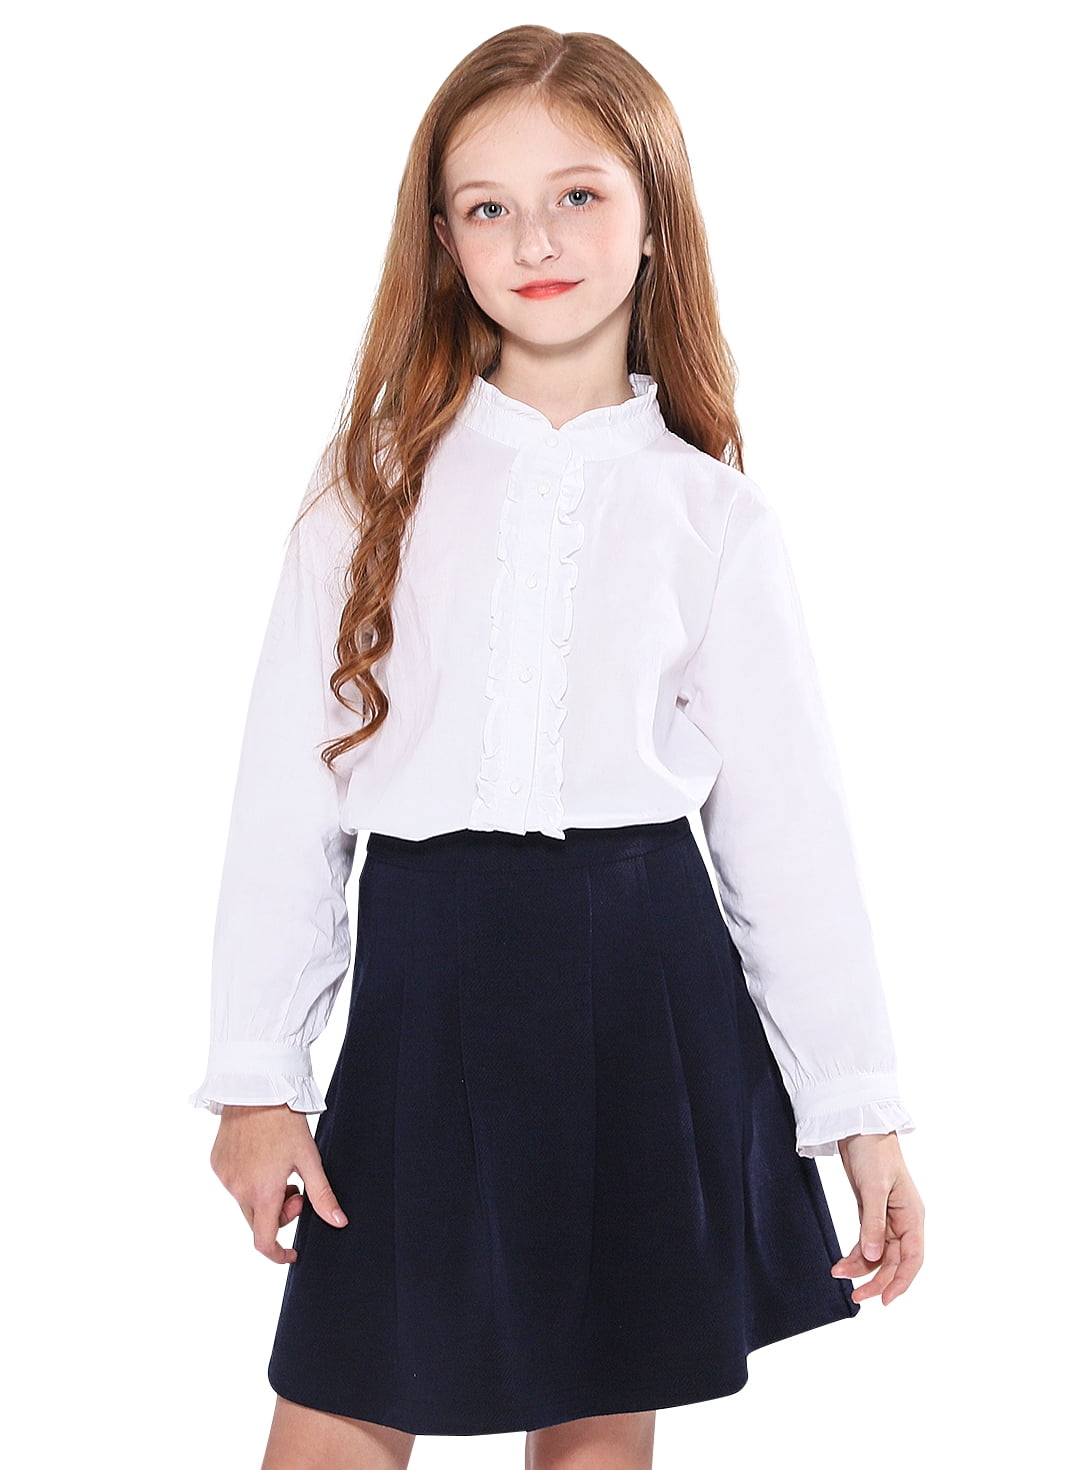 SOLOCOTE Girls White Blouse Ruffle Long Sleeve Button Down Shirts Princess Cotton Loose Soft Tops Spring and Summer 3-14Y 